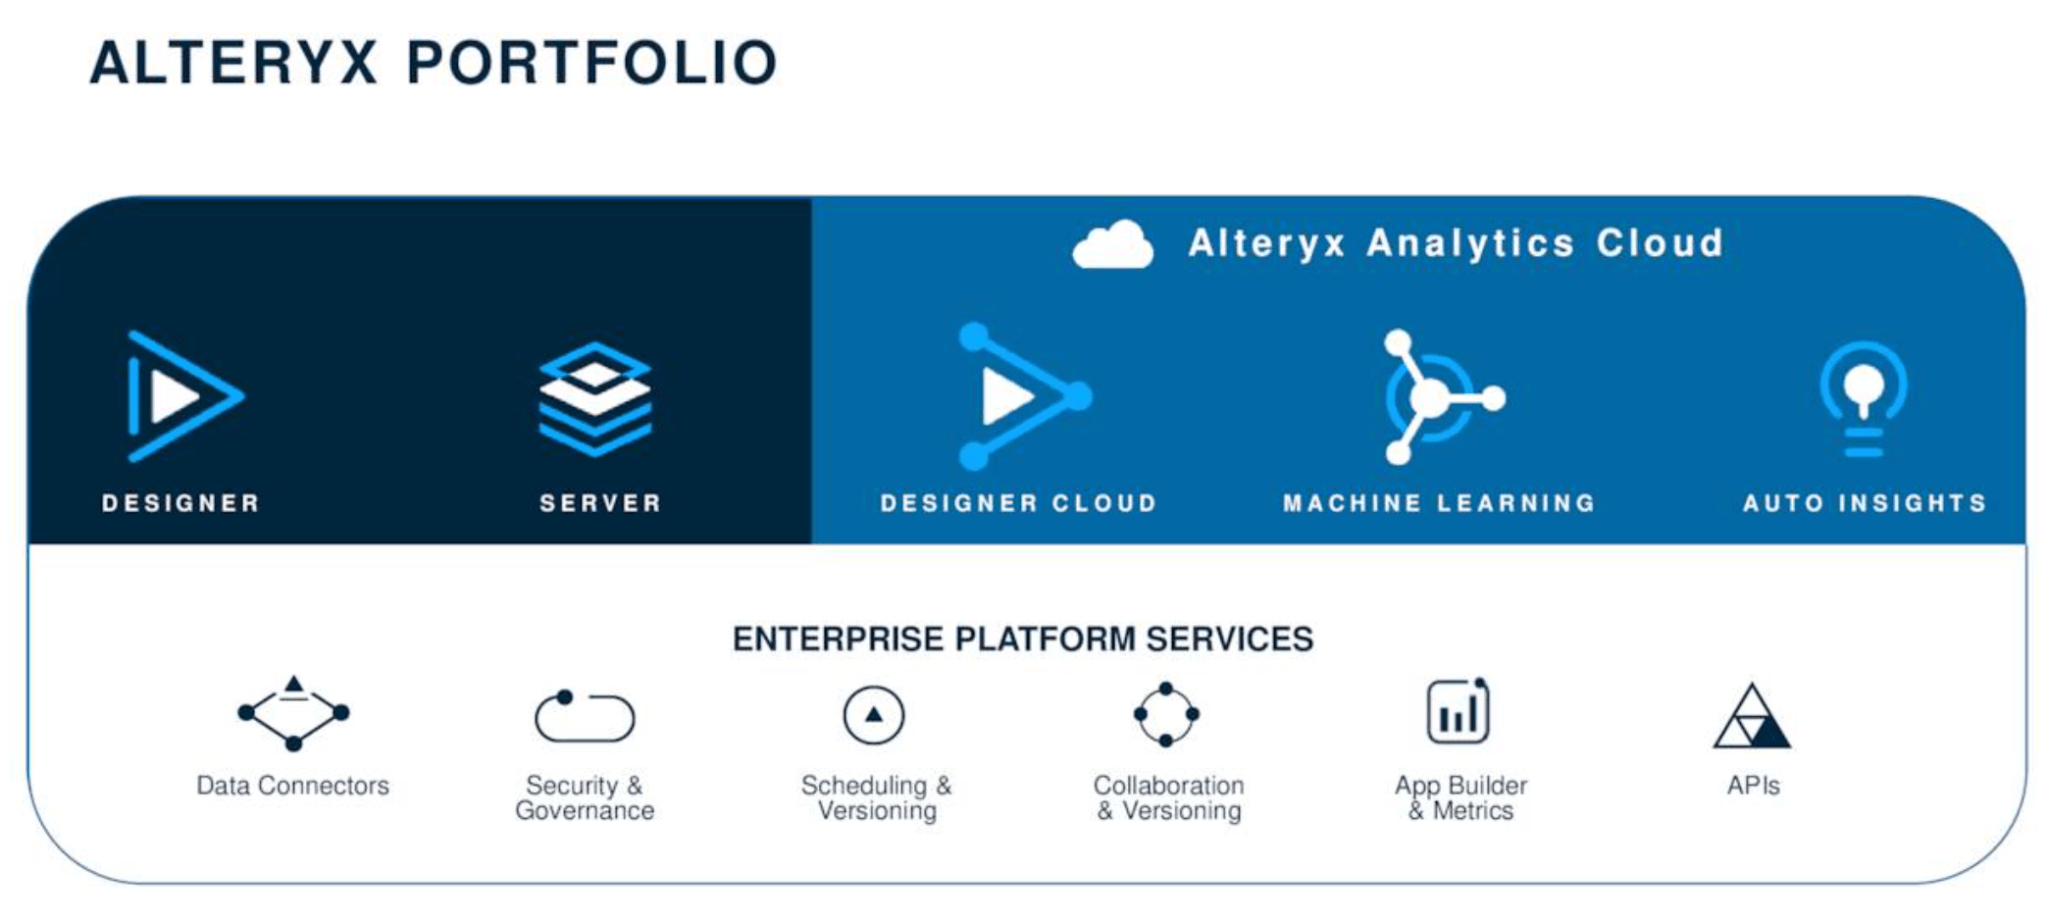 $100,000 Last Call: Top Ten Reasons to Enter the 2 - Alteryx Community